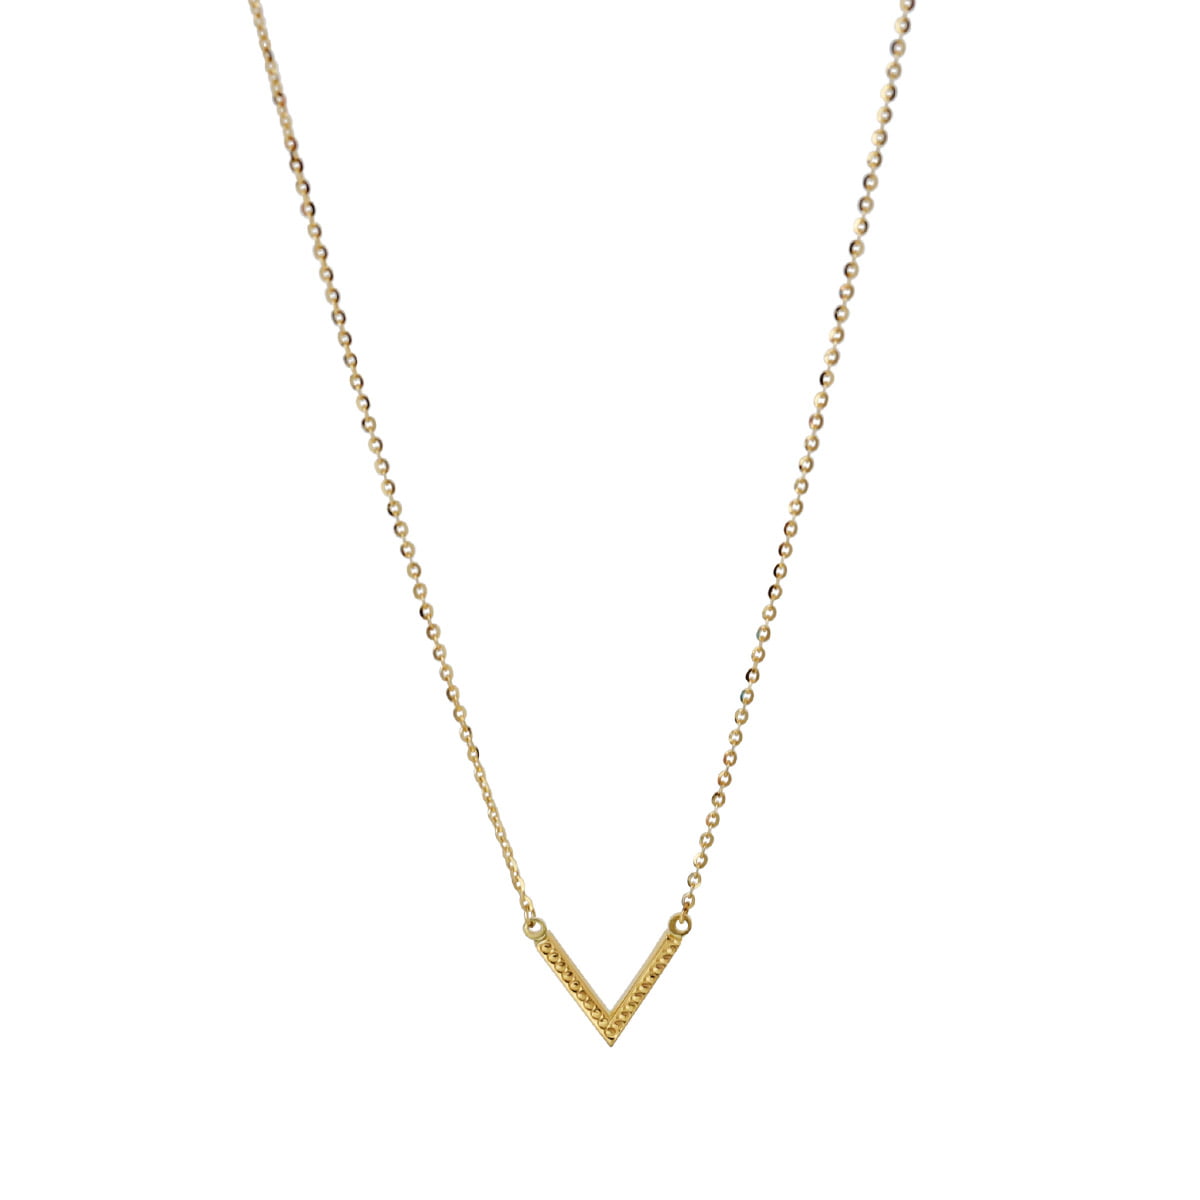 Two sided - V shaped gold necklace for women